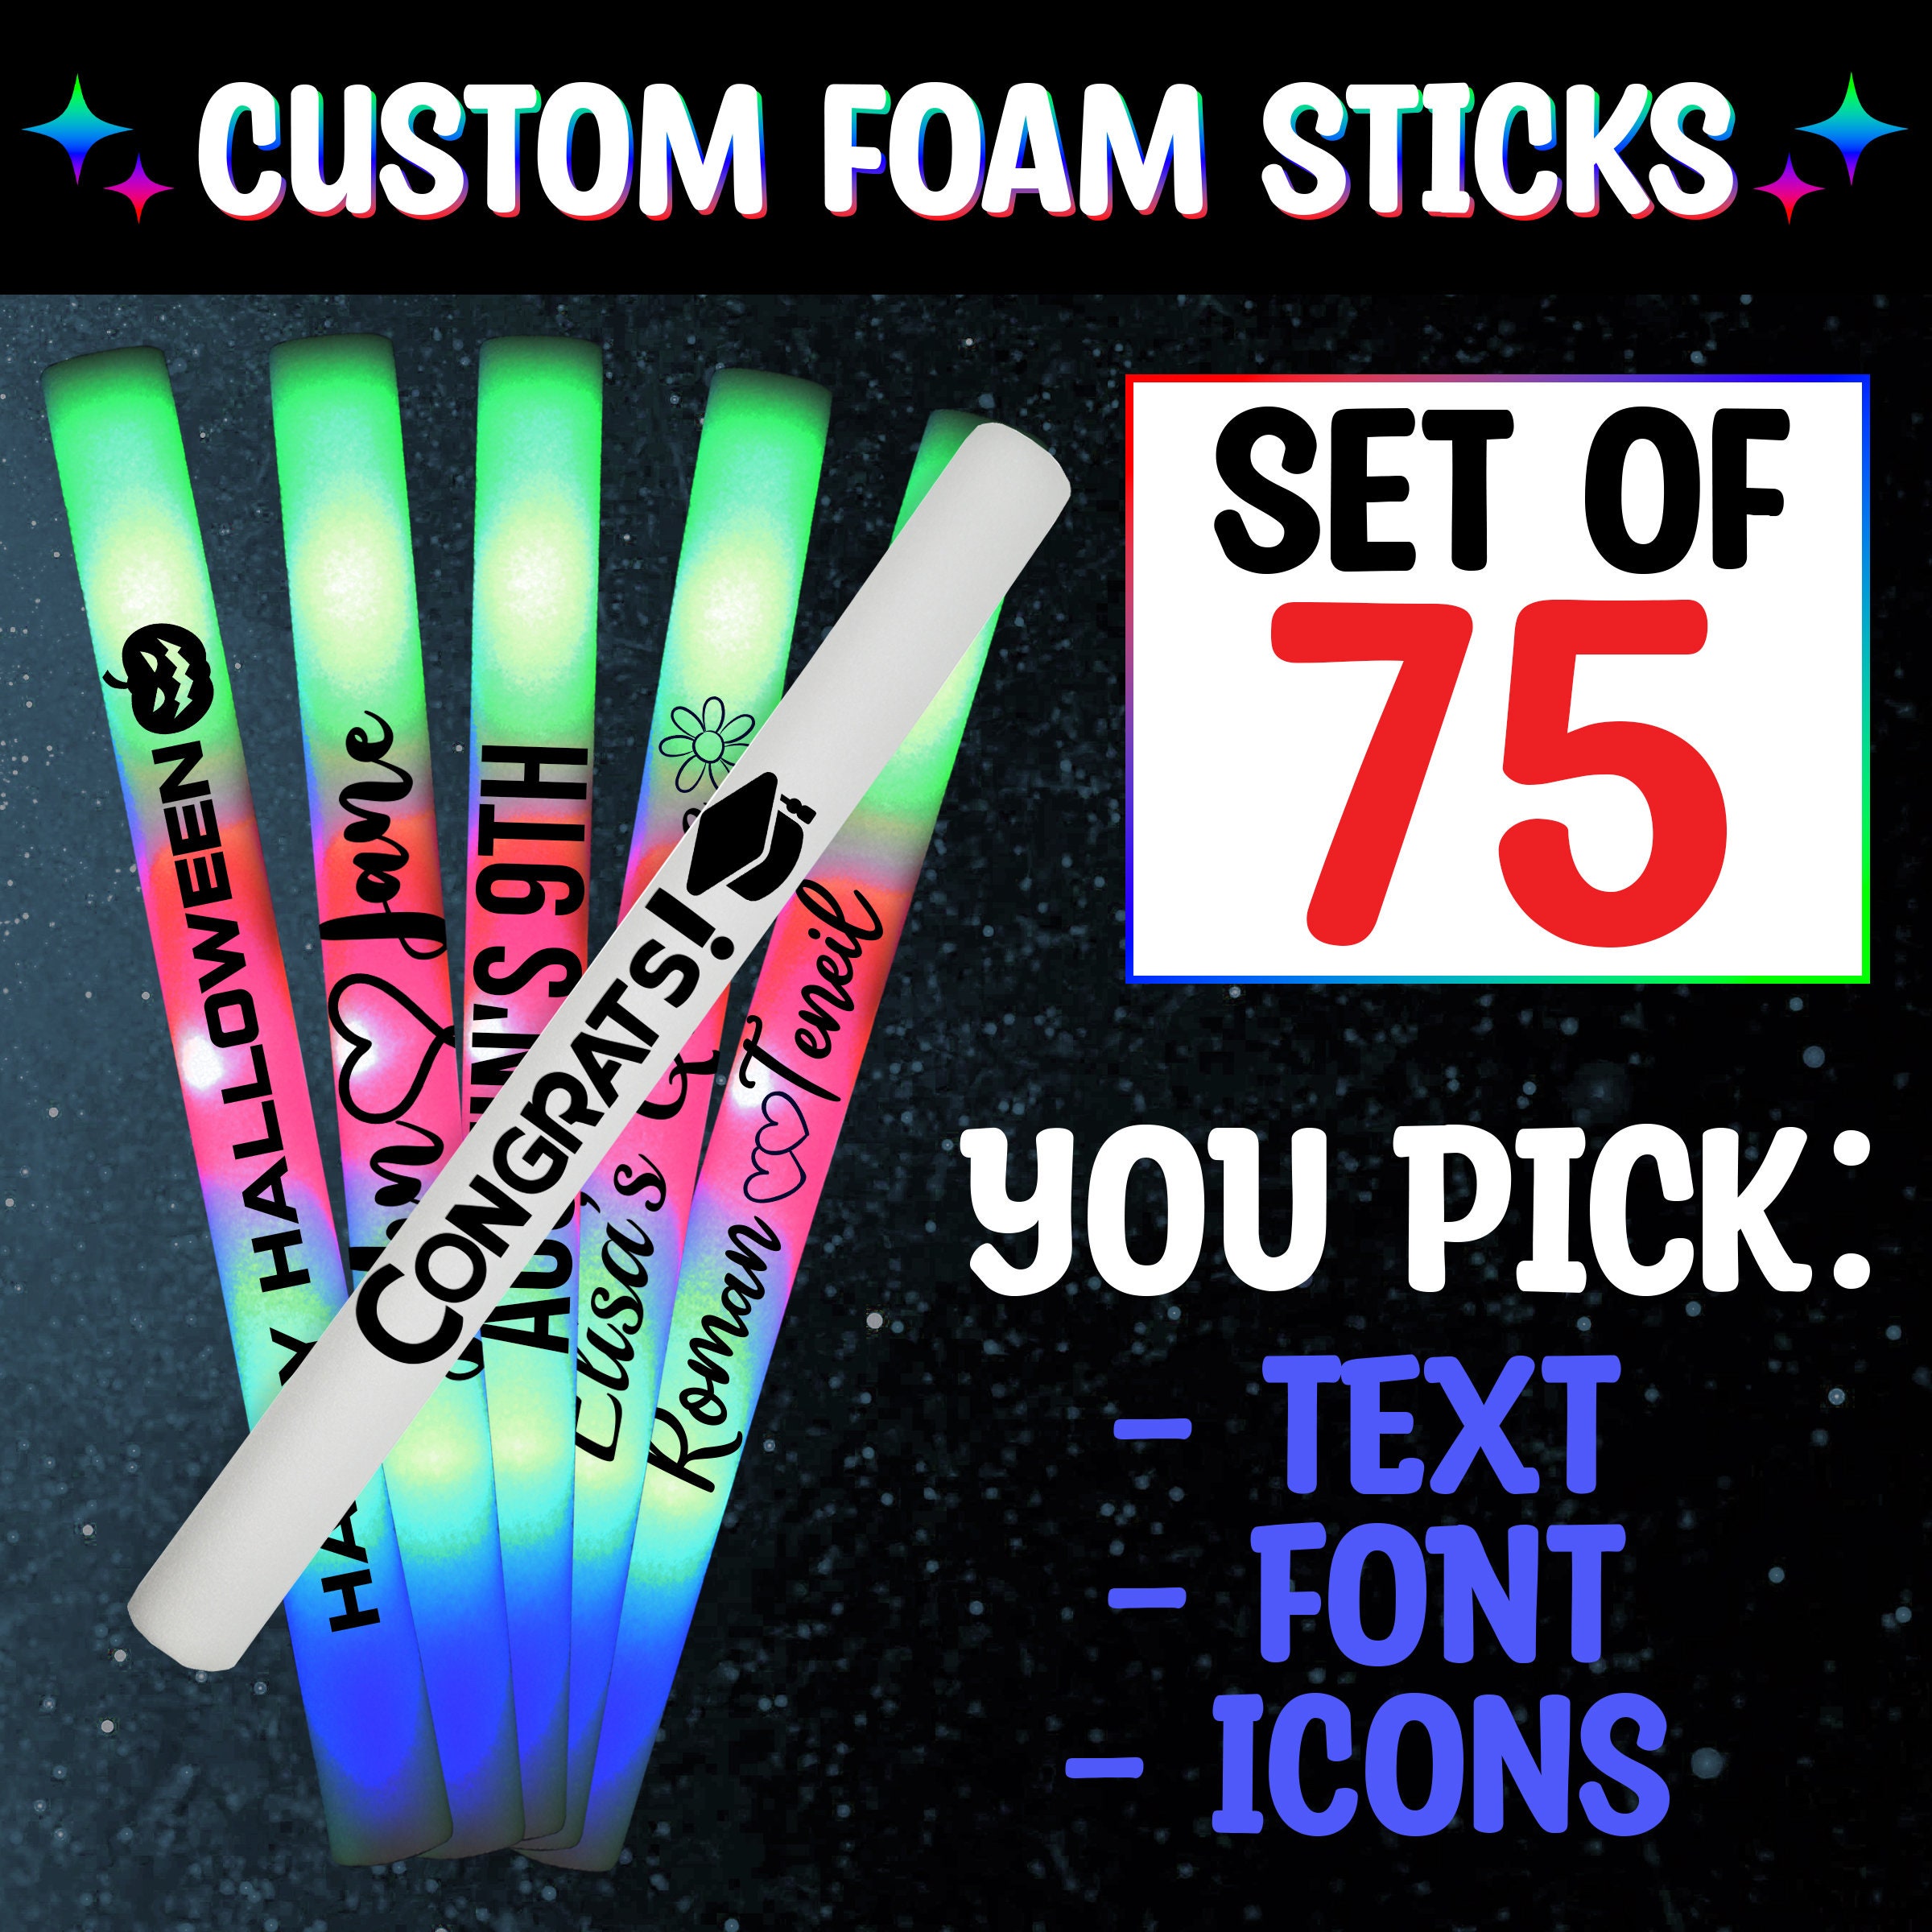 4 INCH INDESTRUCTIBLE + 100% REUSABLE Glowstick, Super Bright + Completely  Safe!